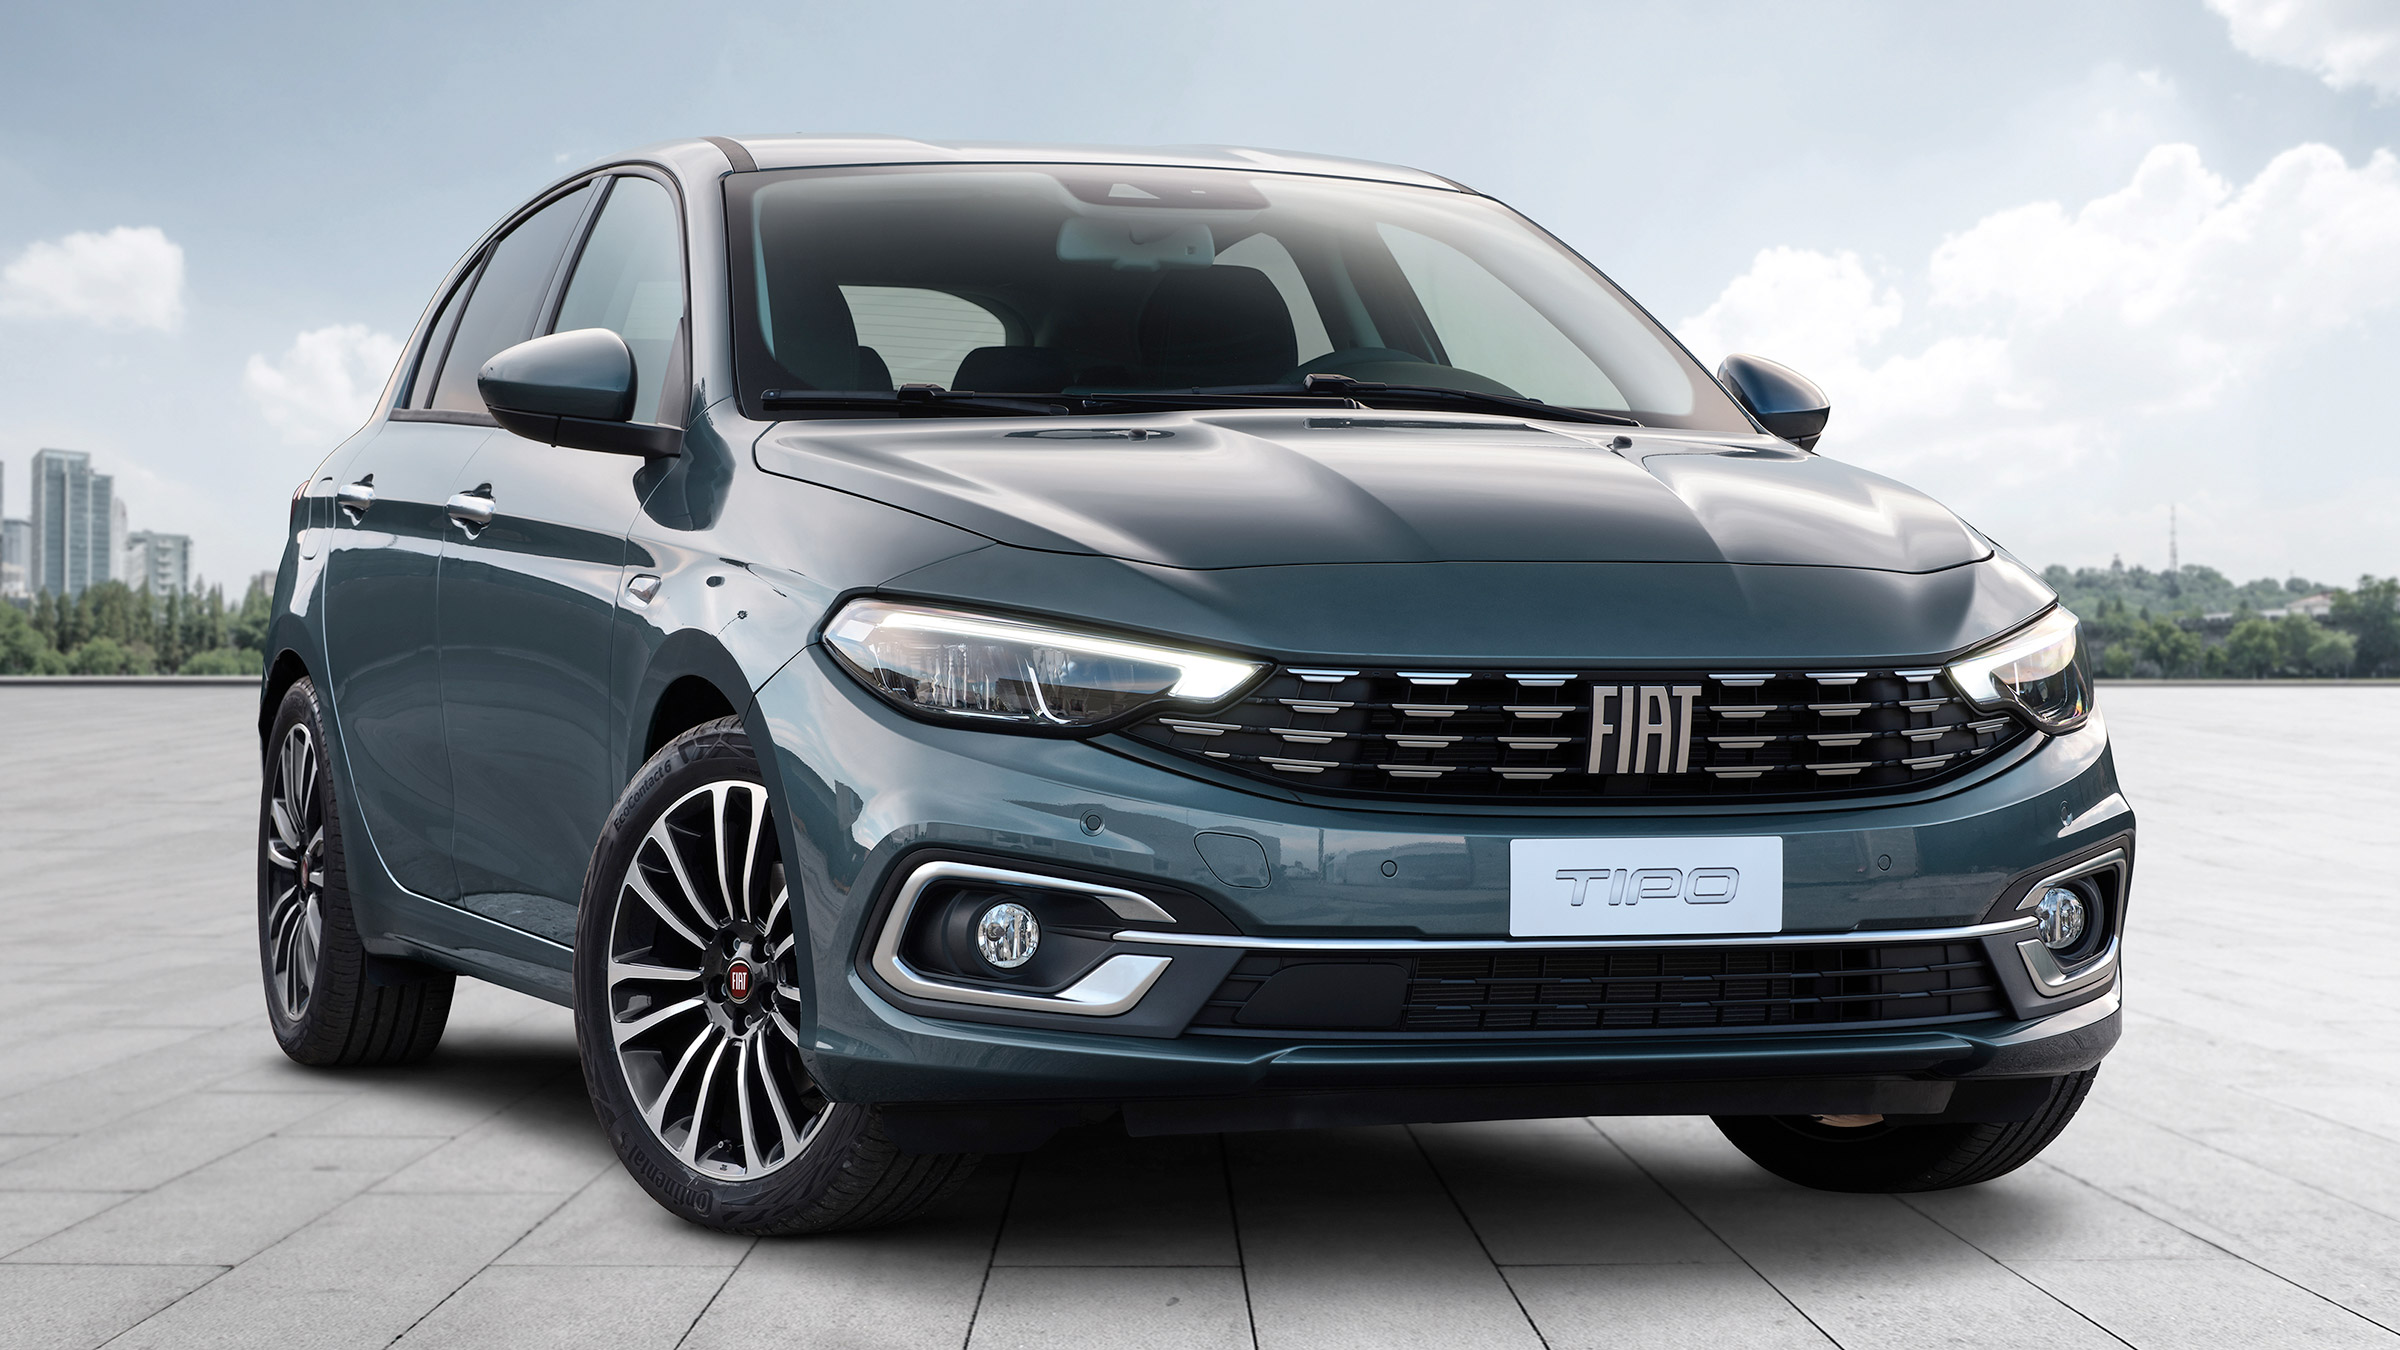 Facelifted Fiat Tipo hatchback on sale now priced from £